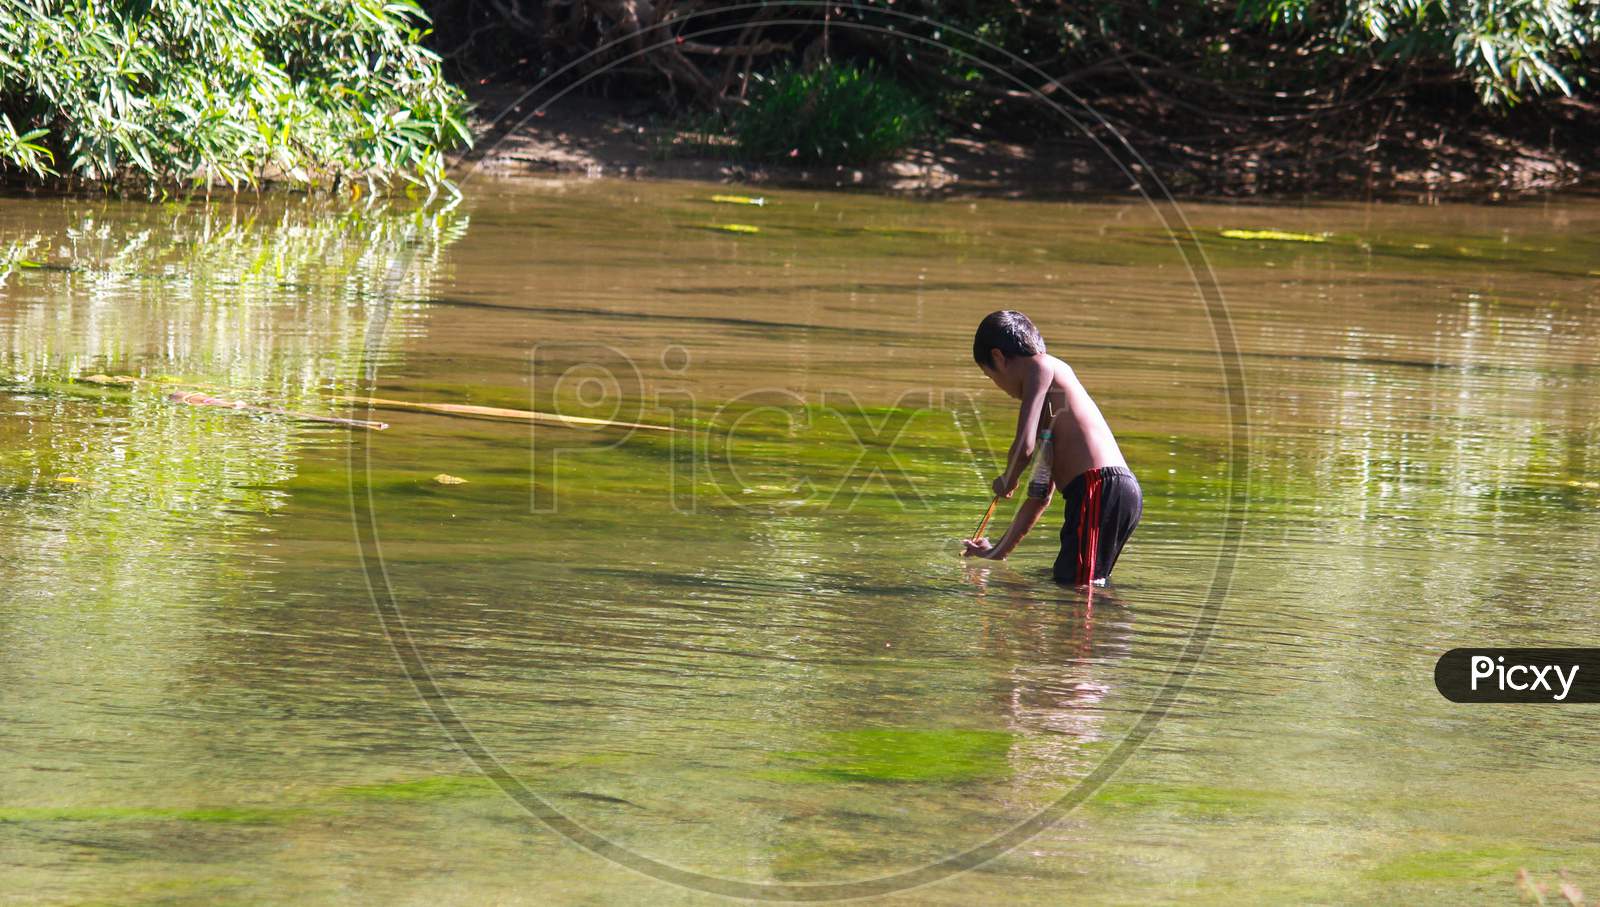 little aboriginal boy catching fish into river in traditional way in Bandarban, Bangladesh